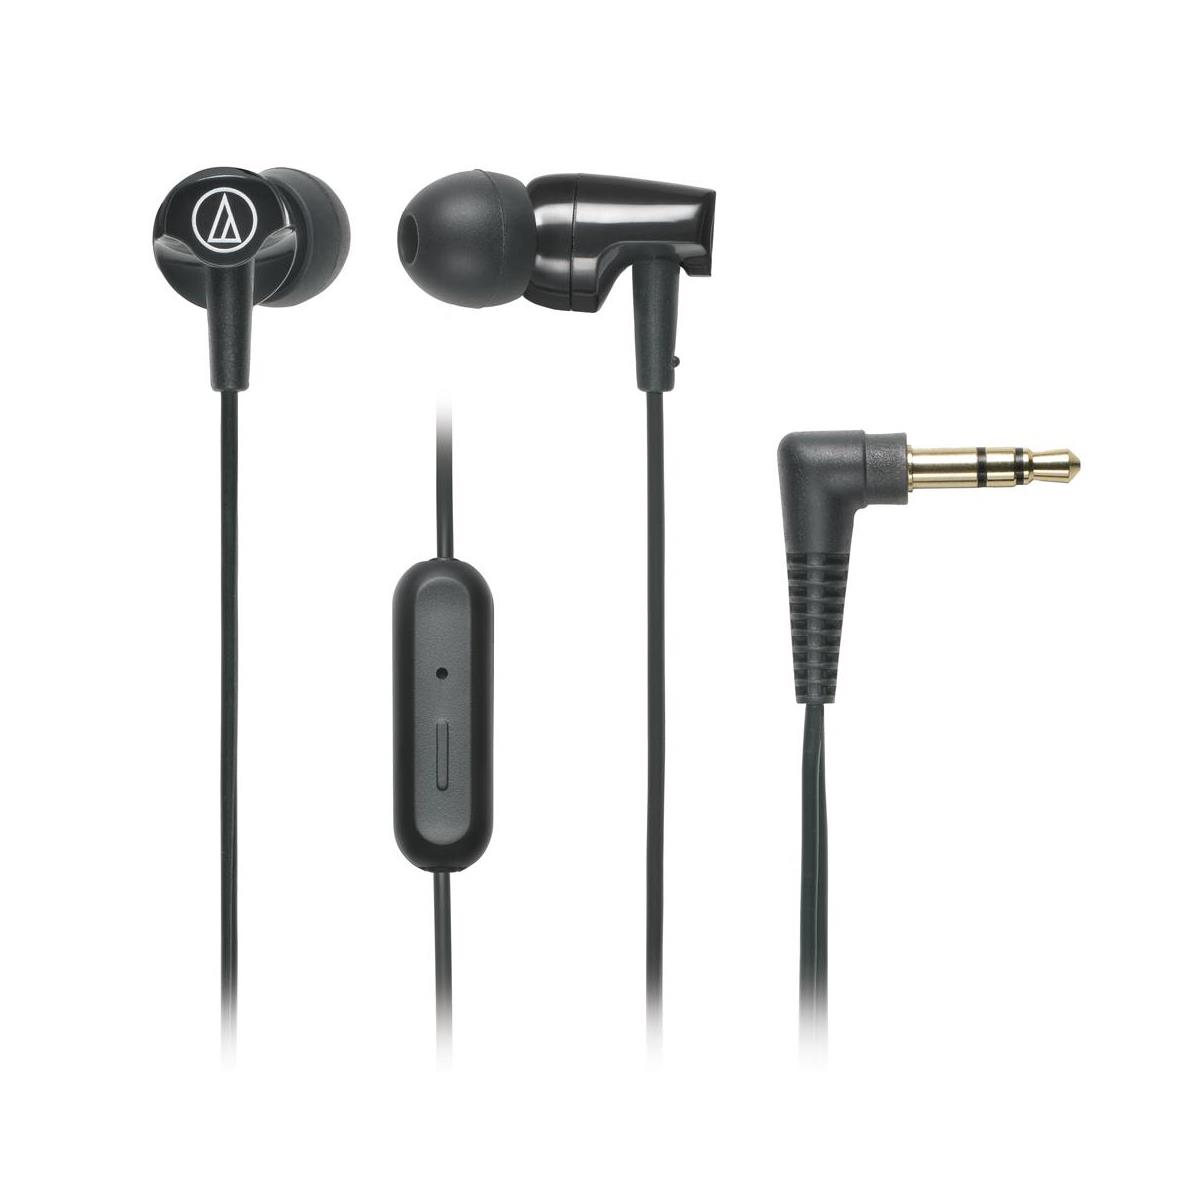 Image of Audio-Technica ATH-CLR100is SonicFuel In-Ear Dynamic Headphones with Mic